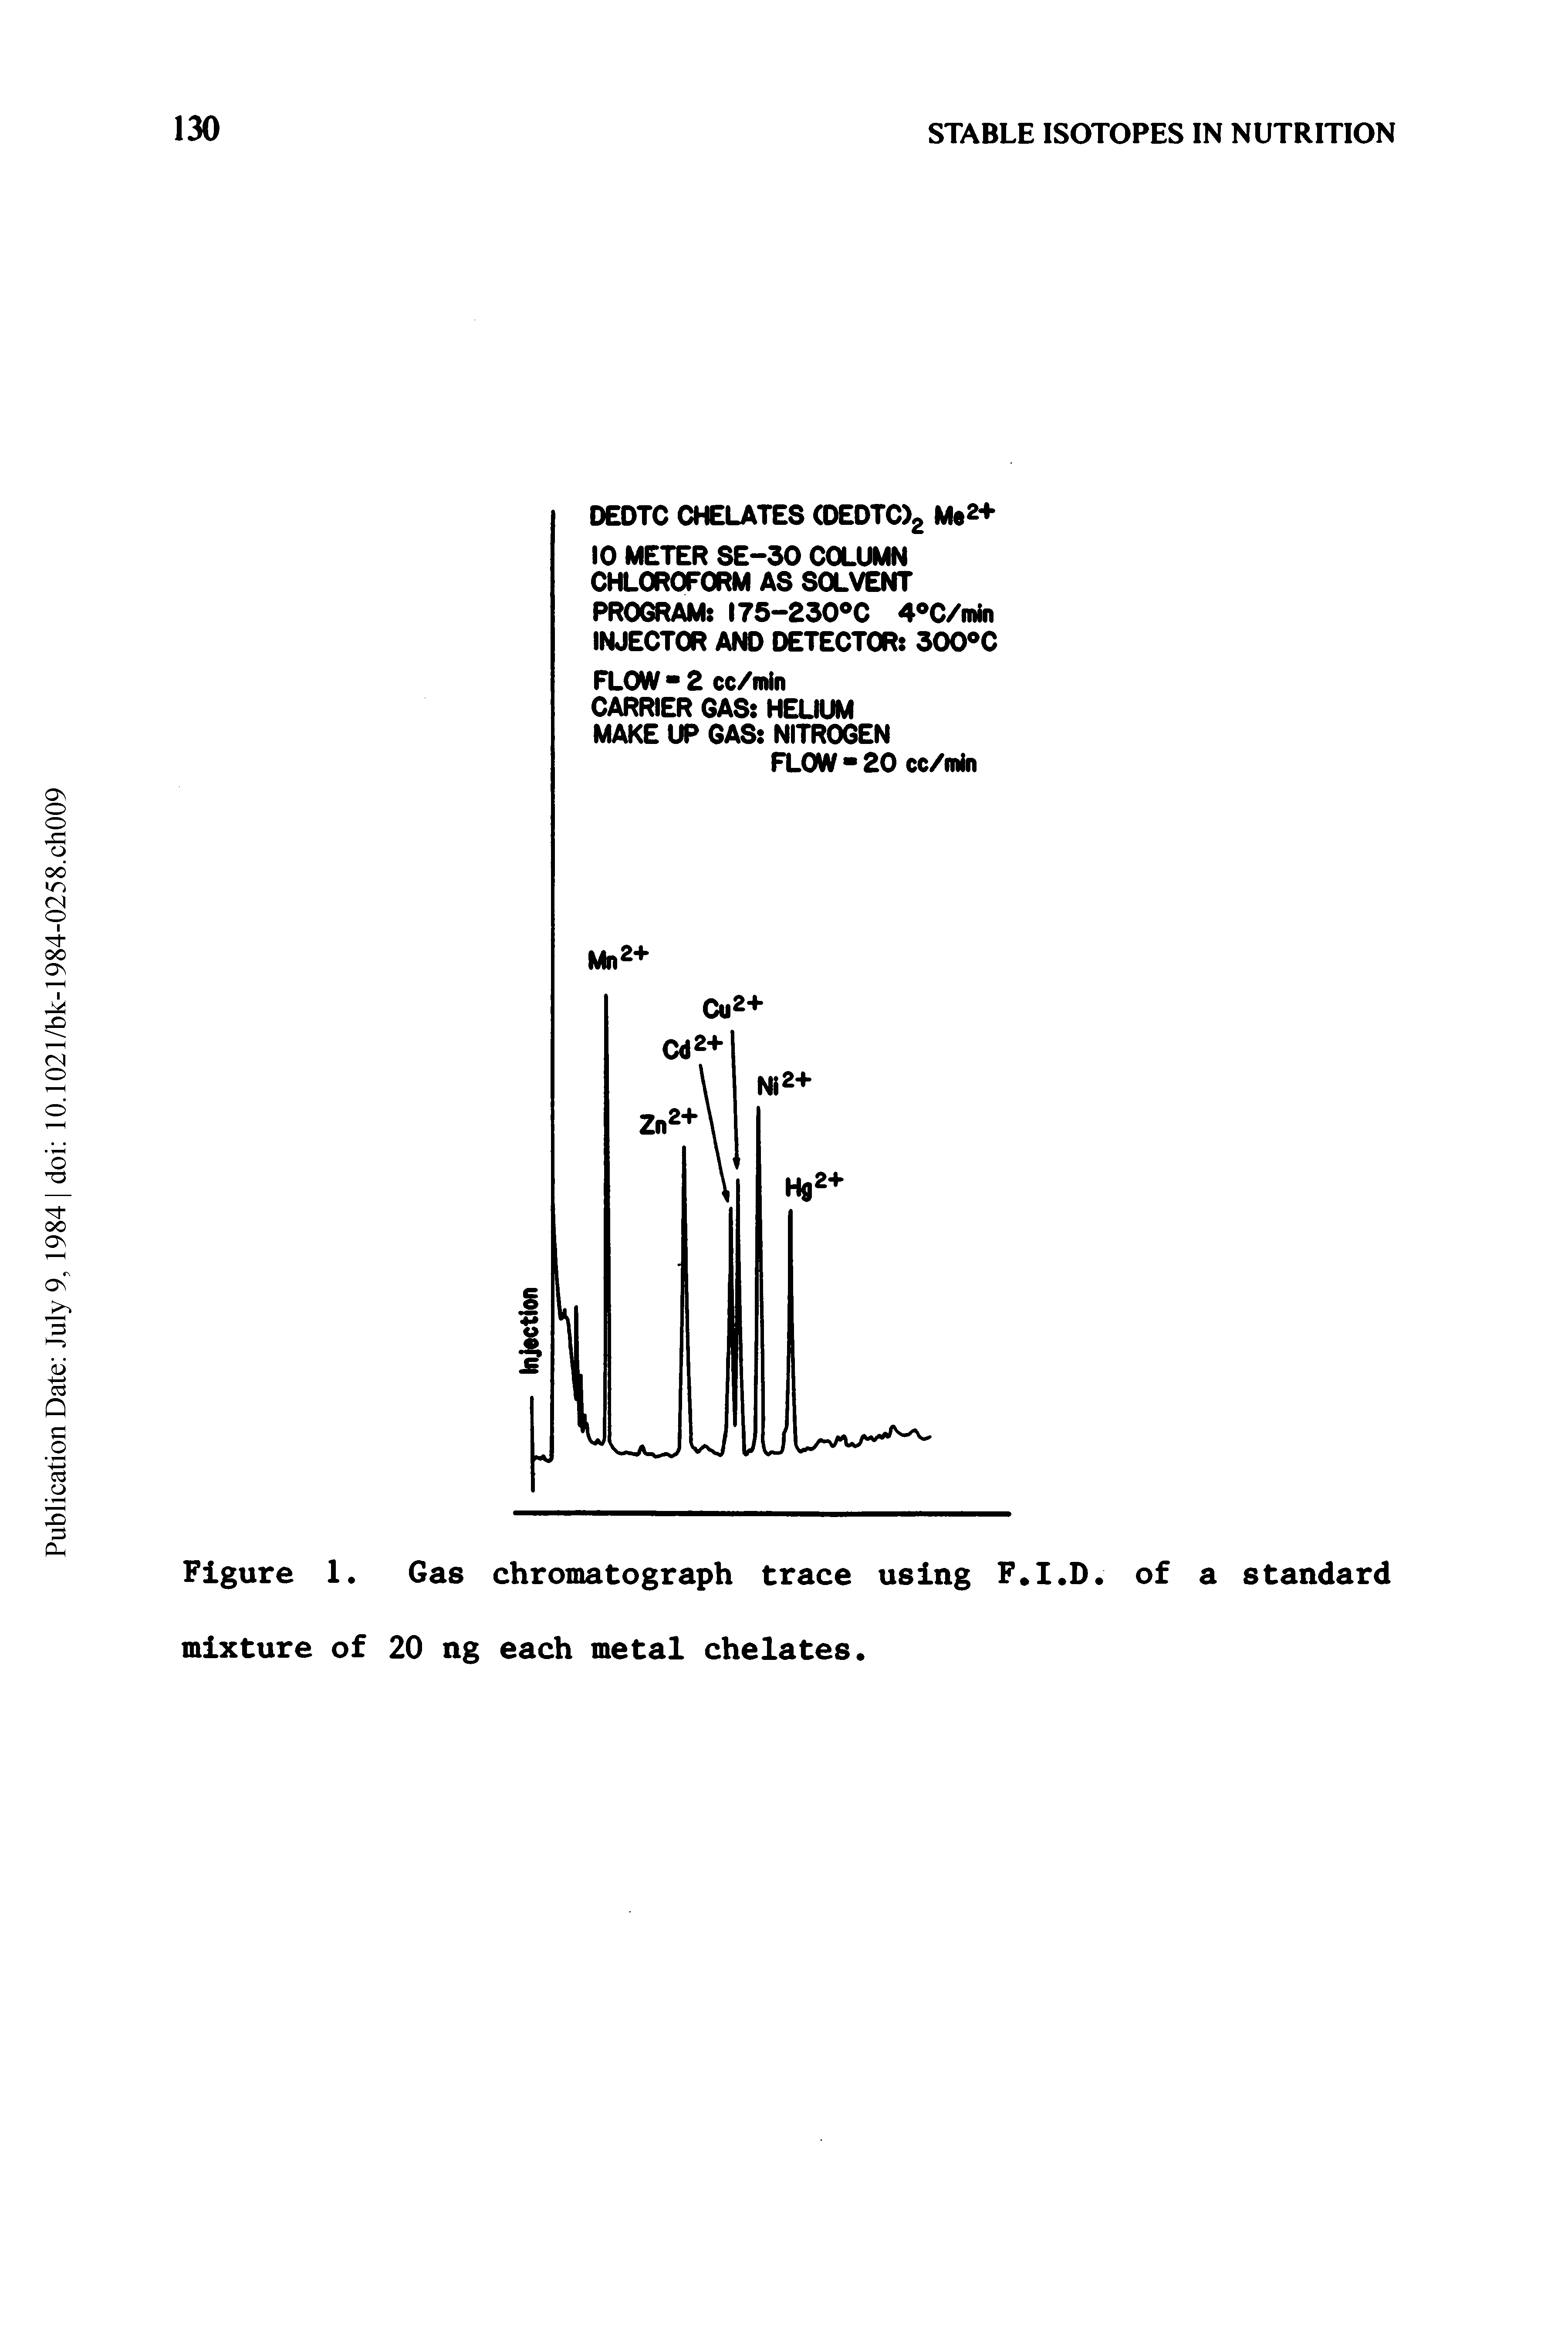 Figure 1. Gas chromatograph trace using F I.D. of a standard mixture of 20 ng each metal chelates.